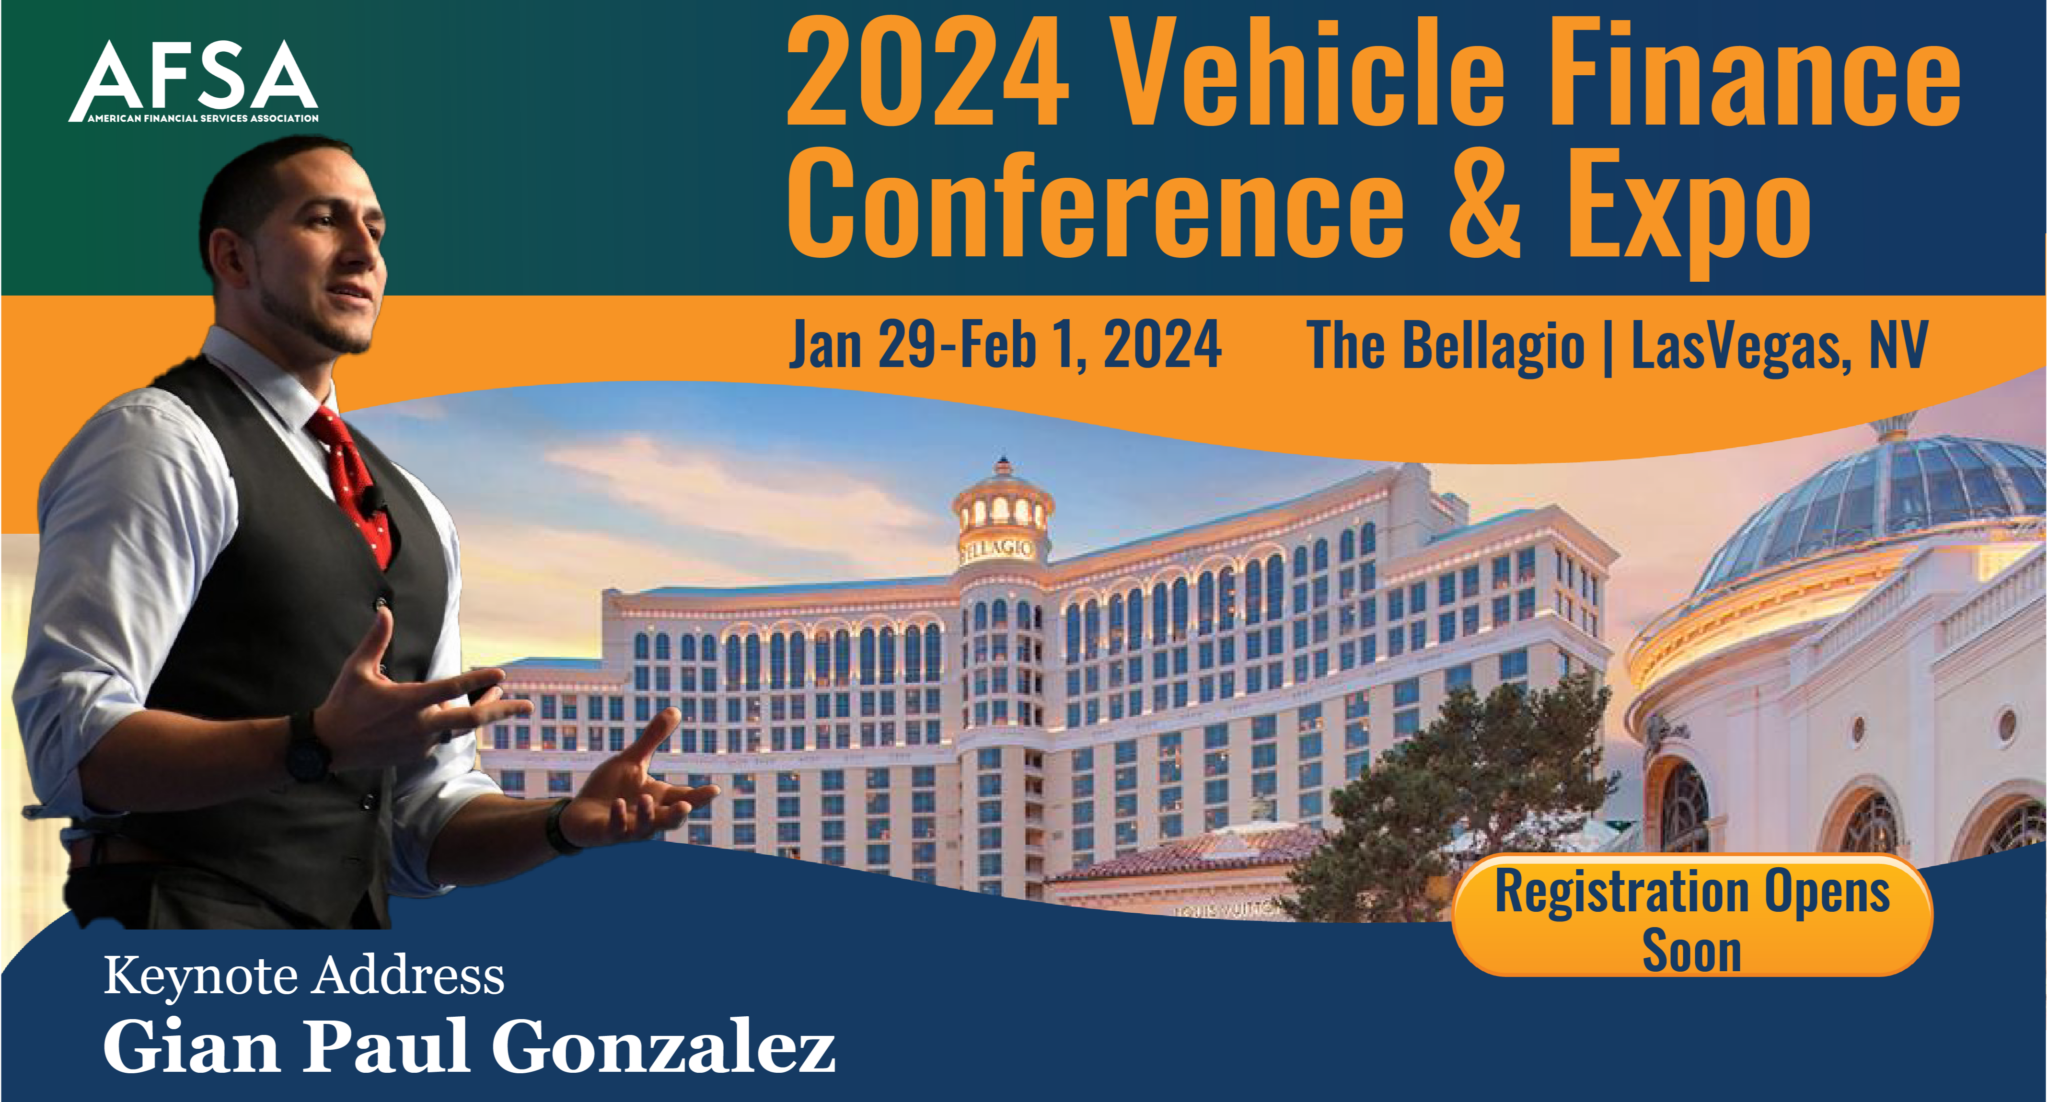 american-financial-services-association-save-the-date-2024-vehicle-finance-conference-expo